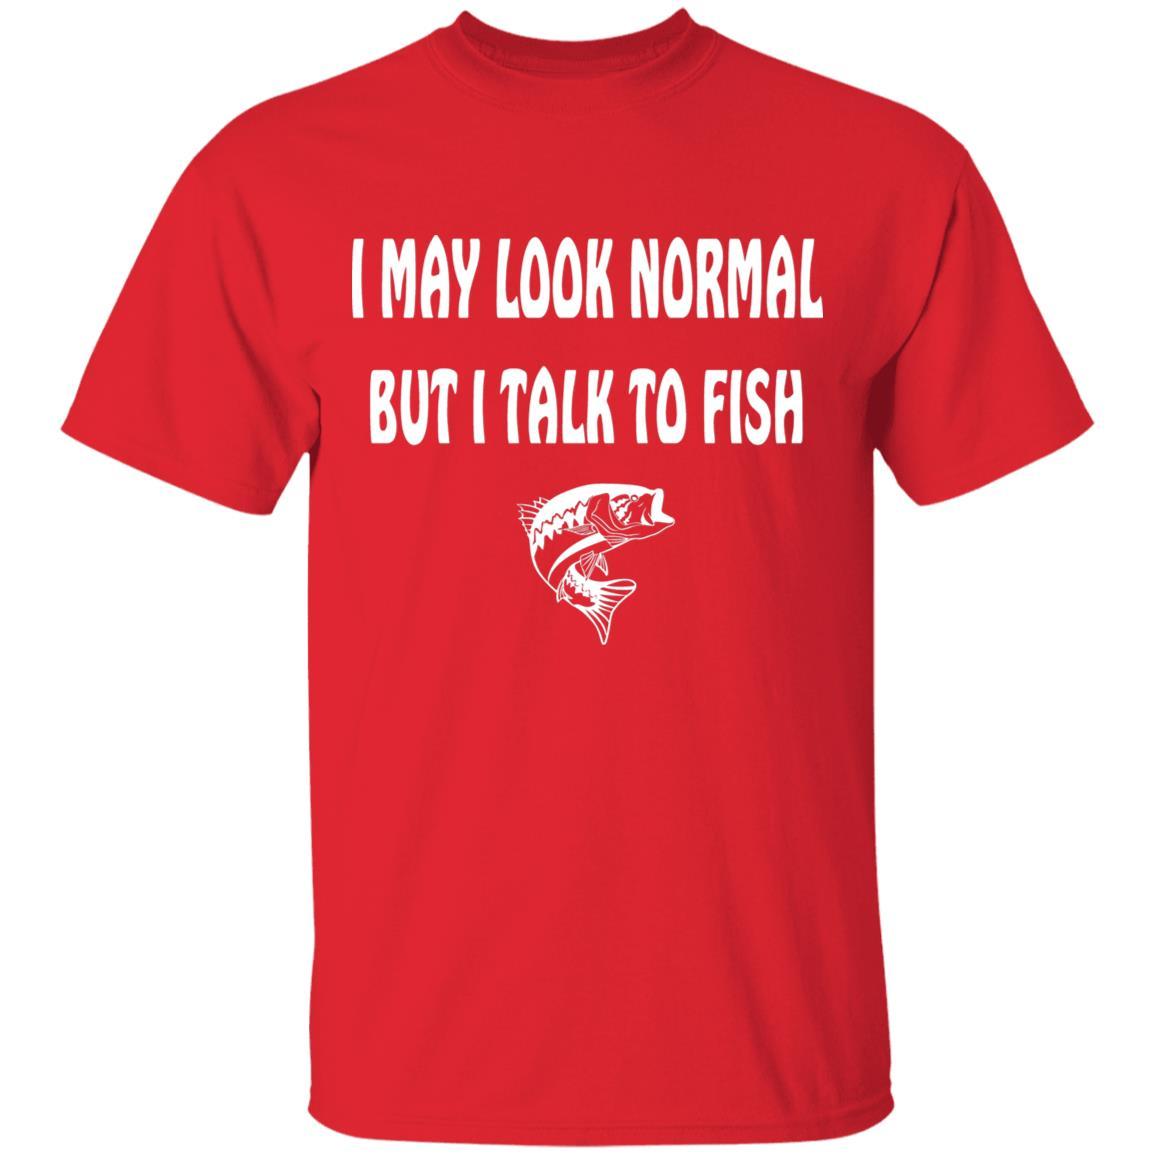 I may look normal but i talk to fish t shirt w red